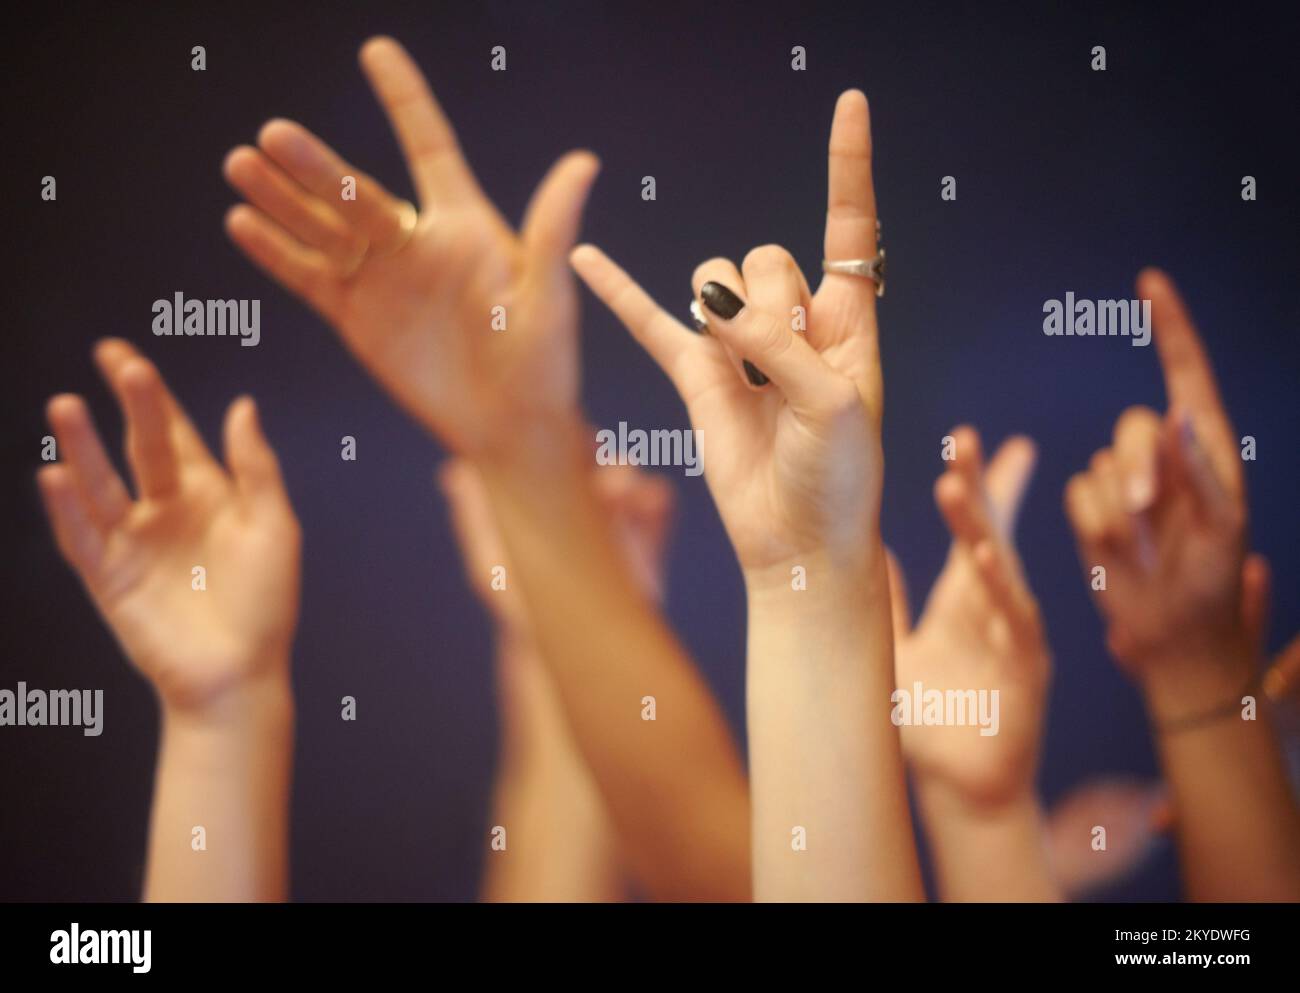 Reaching out to the performers. Cropped image of hands raised and reaching towards the stage gesturing rock on. Stock Photo